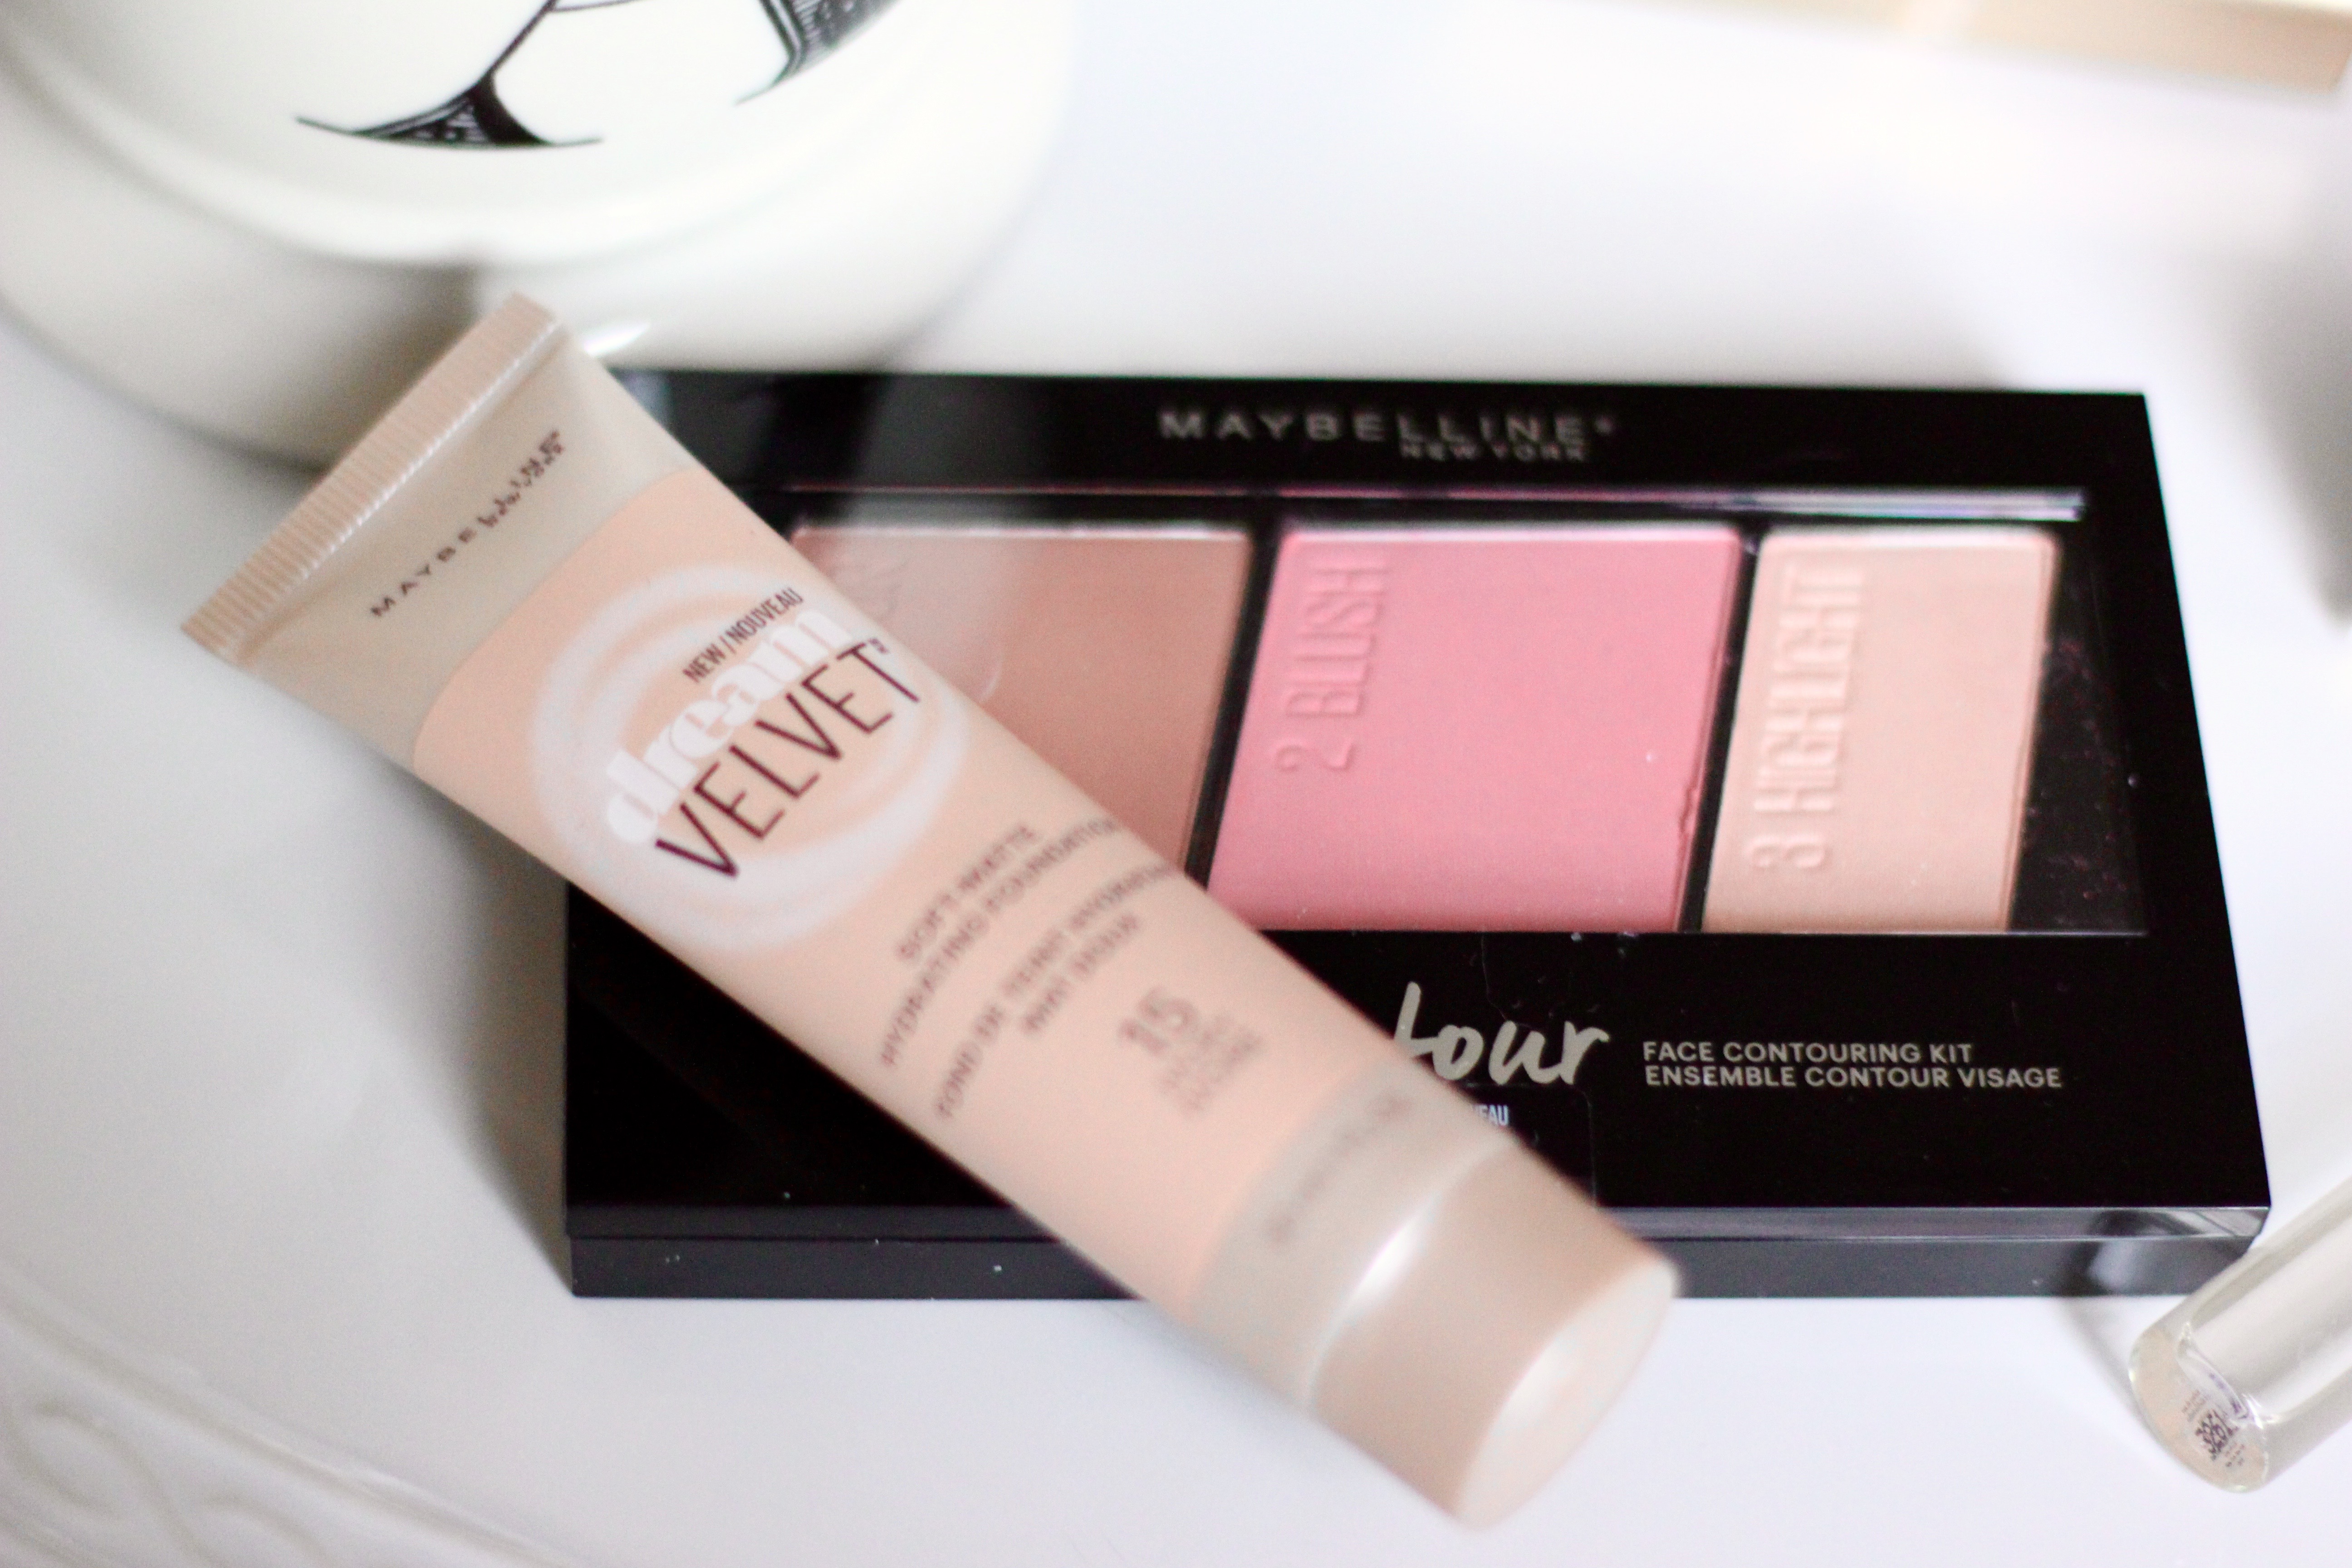 foundation and contour palette from maybelline